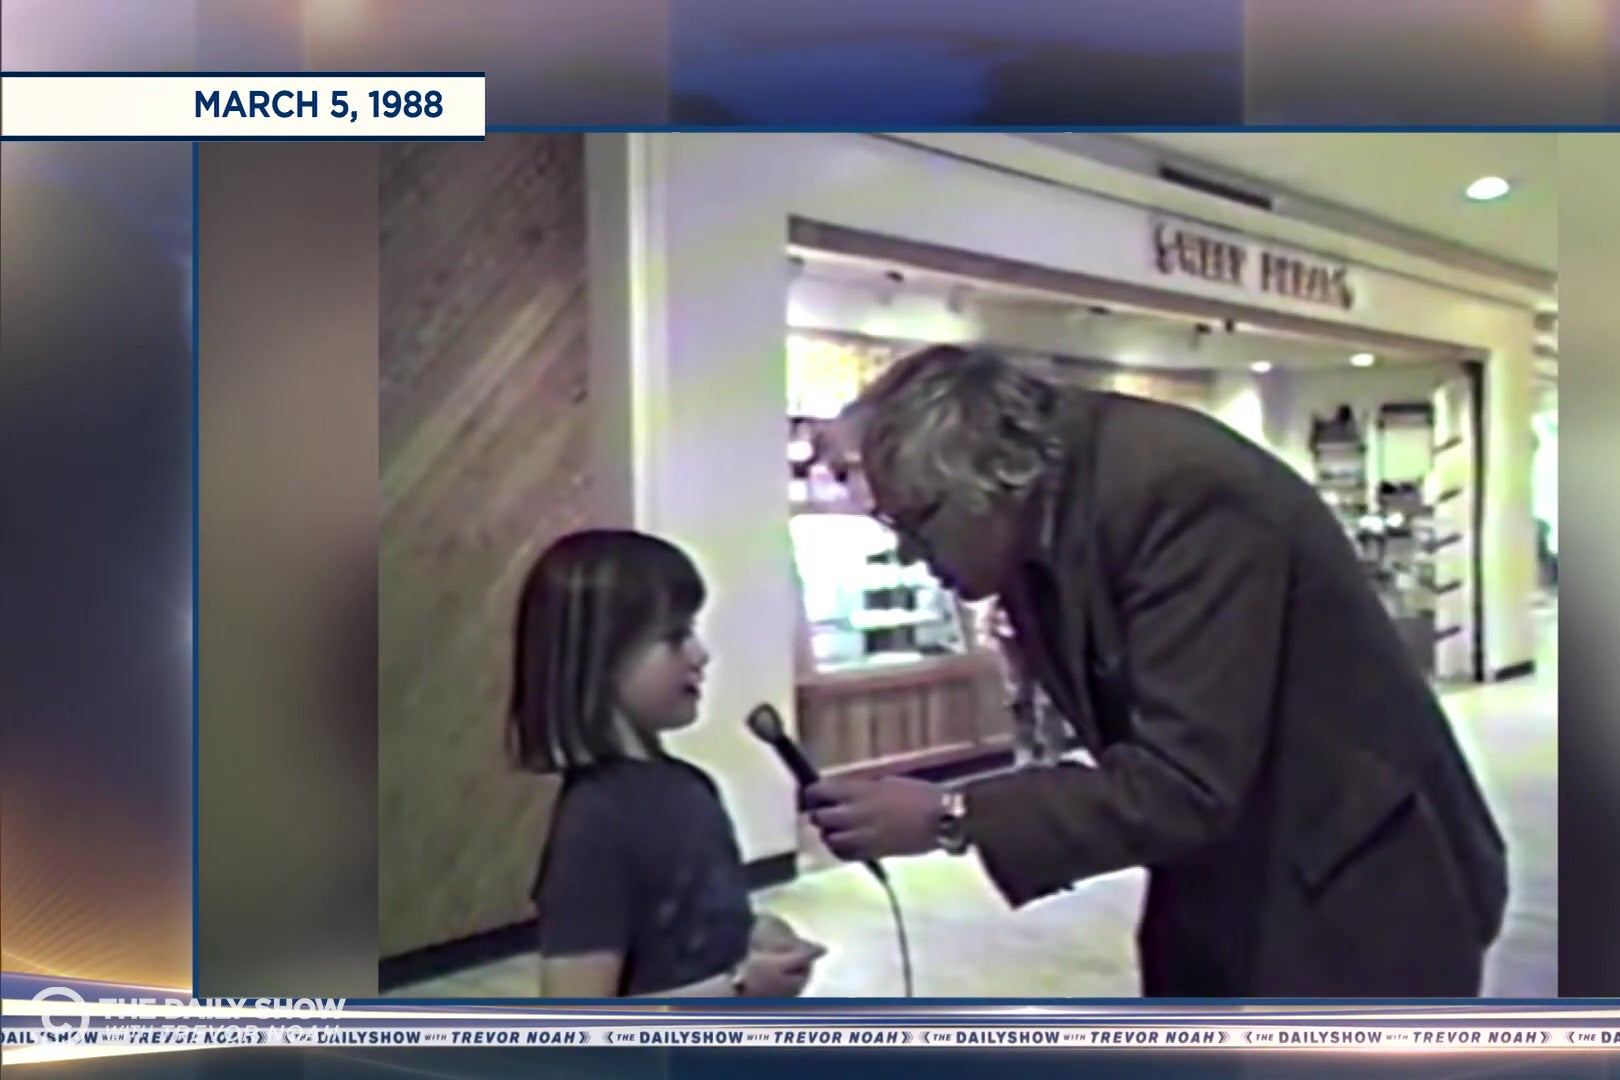 A still from Bernie Sanders' public access show in which he is leaning way over to interview a very short little girl.